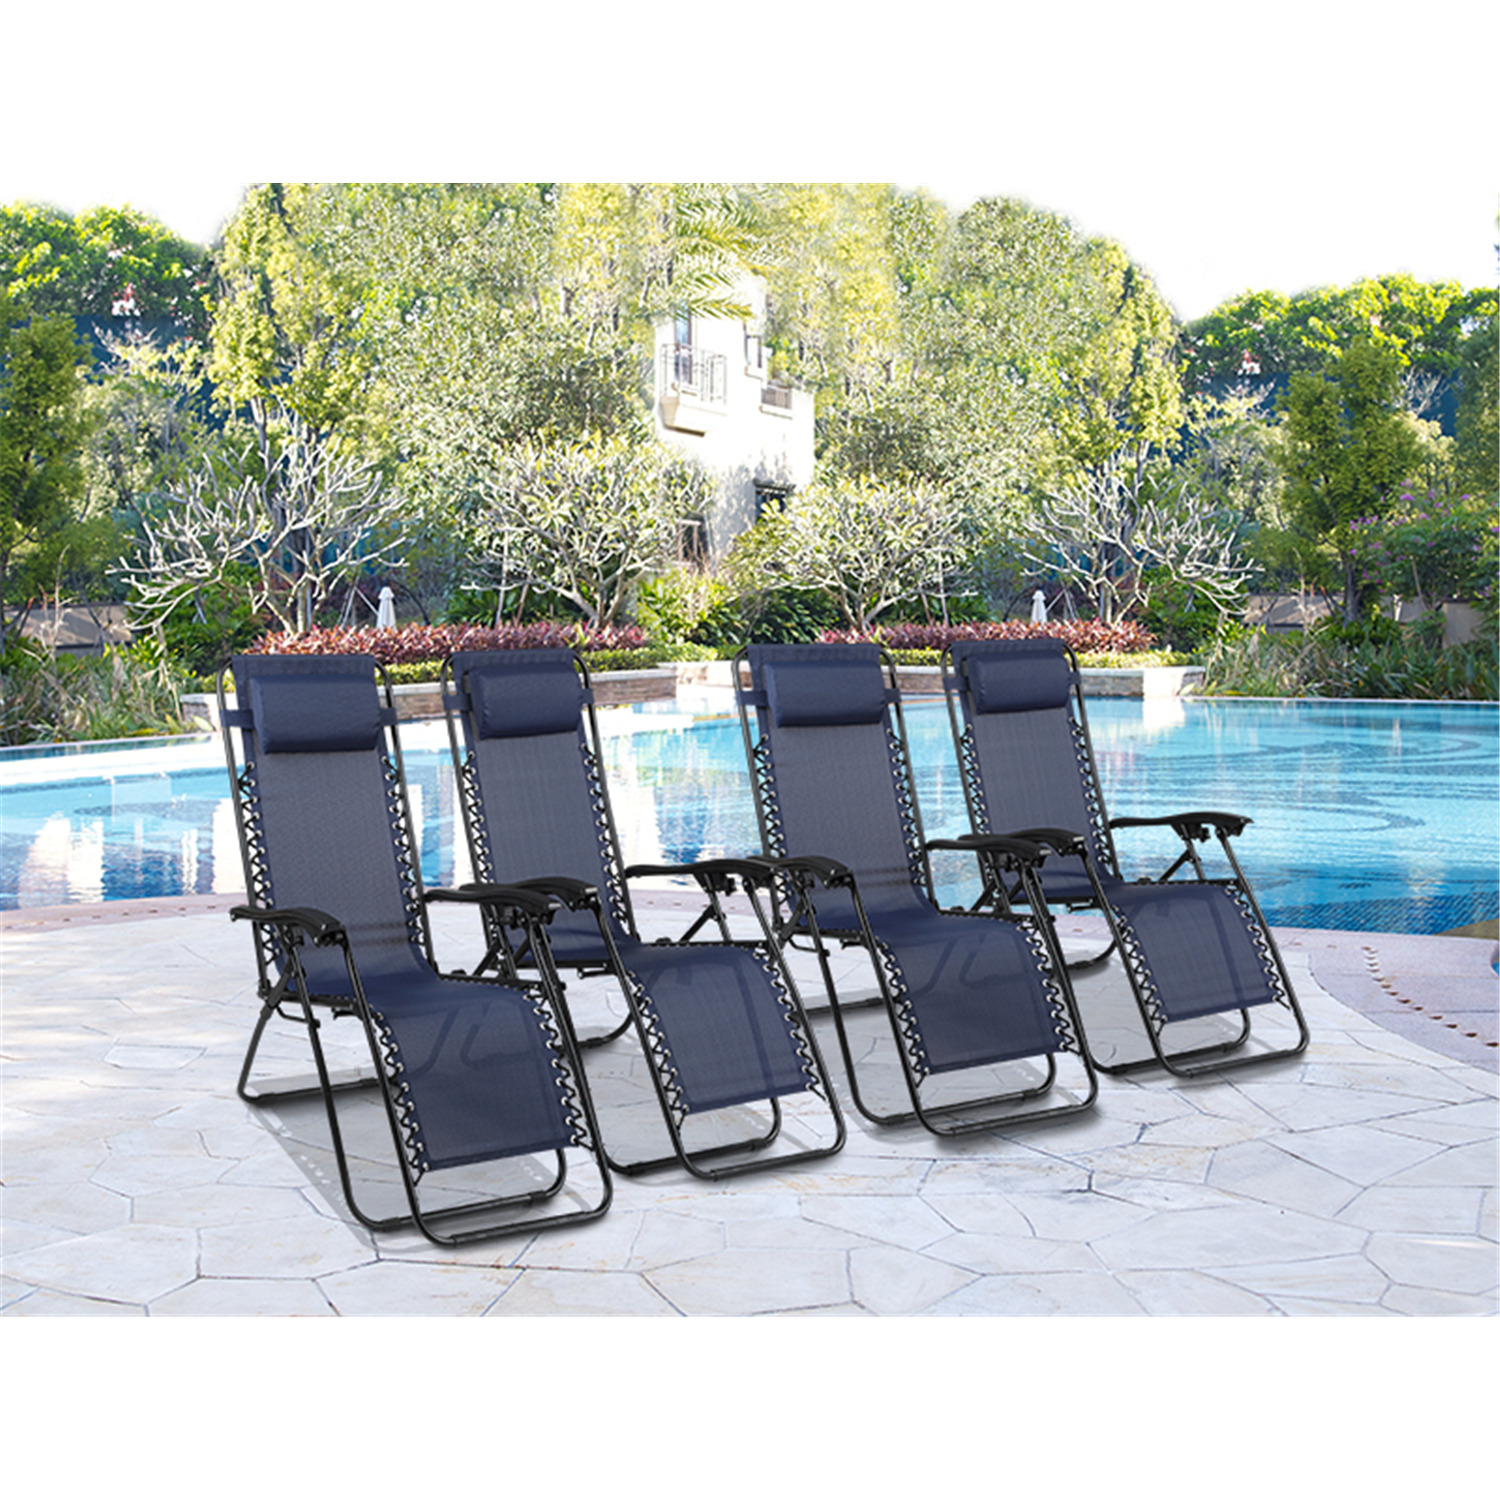 Zero Gravity Chairs Set of 4 Pool Lounge Chair Zero Gravity Recliner Lawn Patio Outdoor Porch Beach Backyard Anti Gravity Chair Folding Reclining Camping Chair, Blue - image 1 of 8